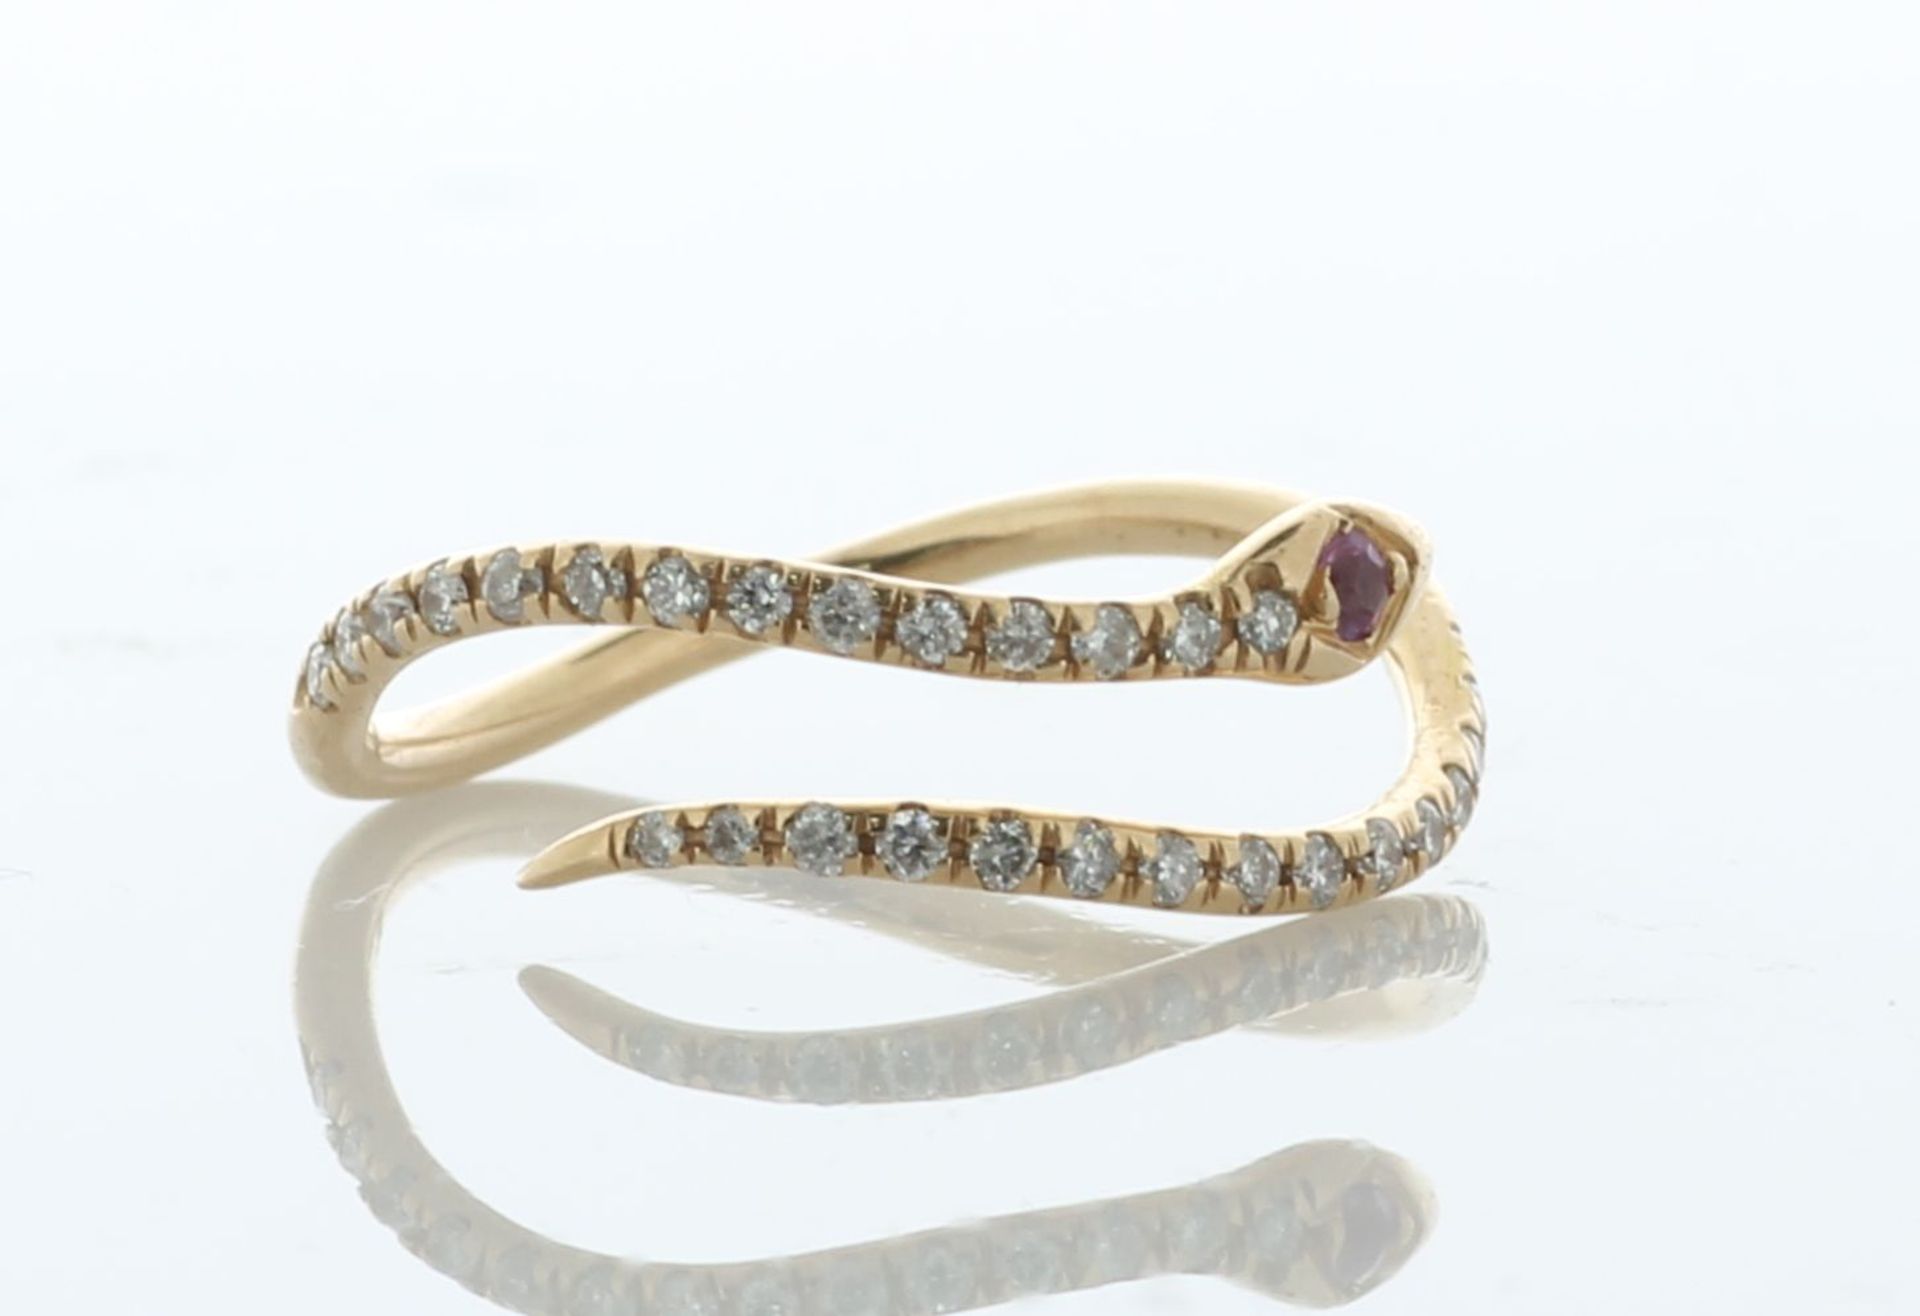 18ct Rose Gold Diamond And Pink Sapphire Snake Ring 0.25 Carats - Valued By AGI £1,650.00 - This